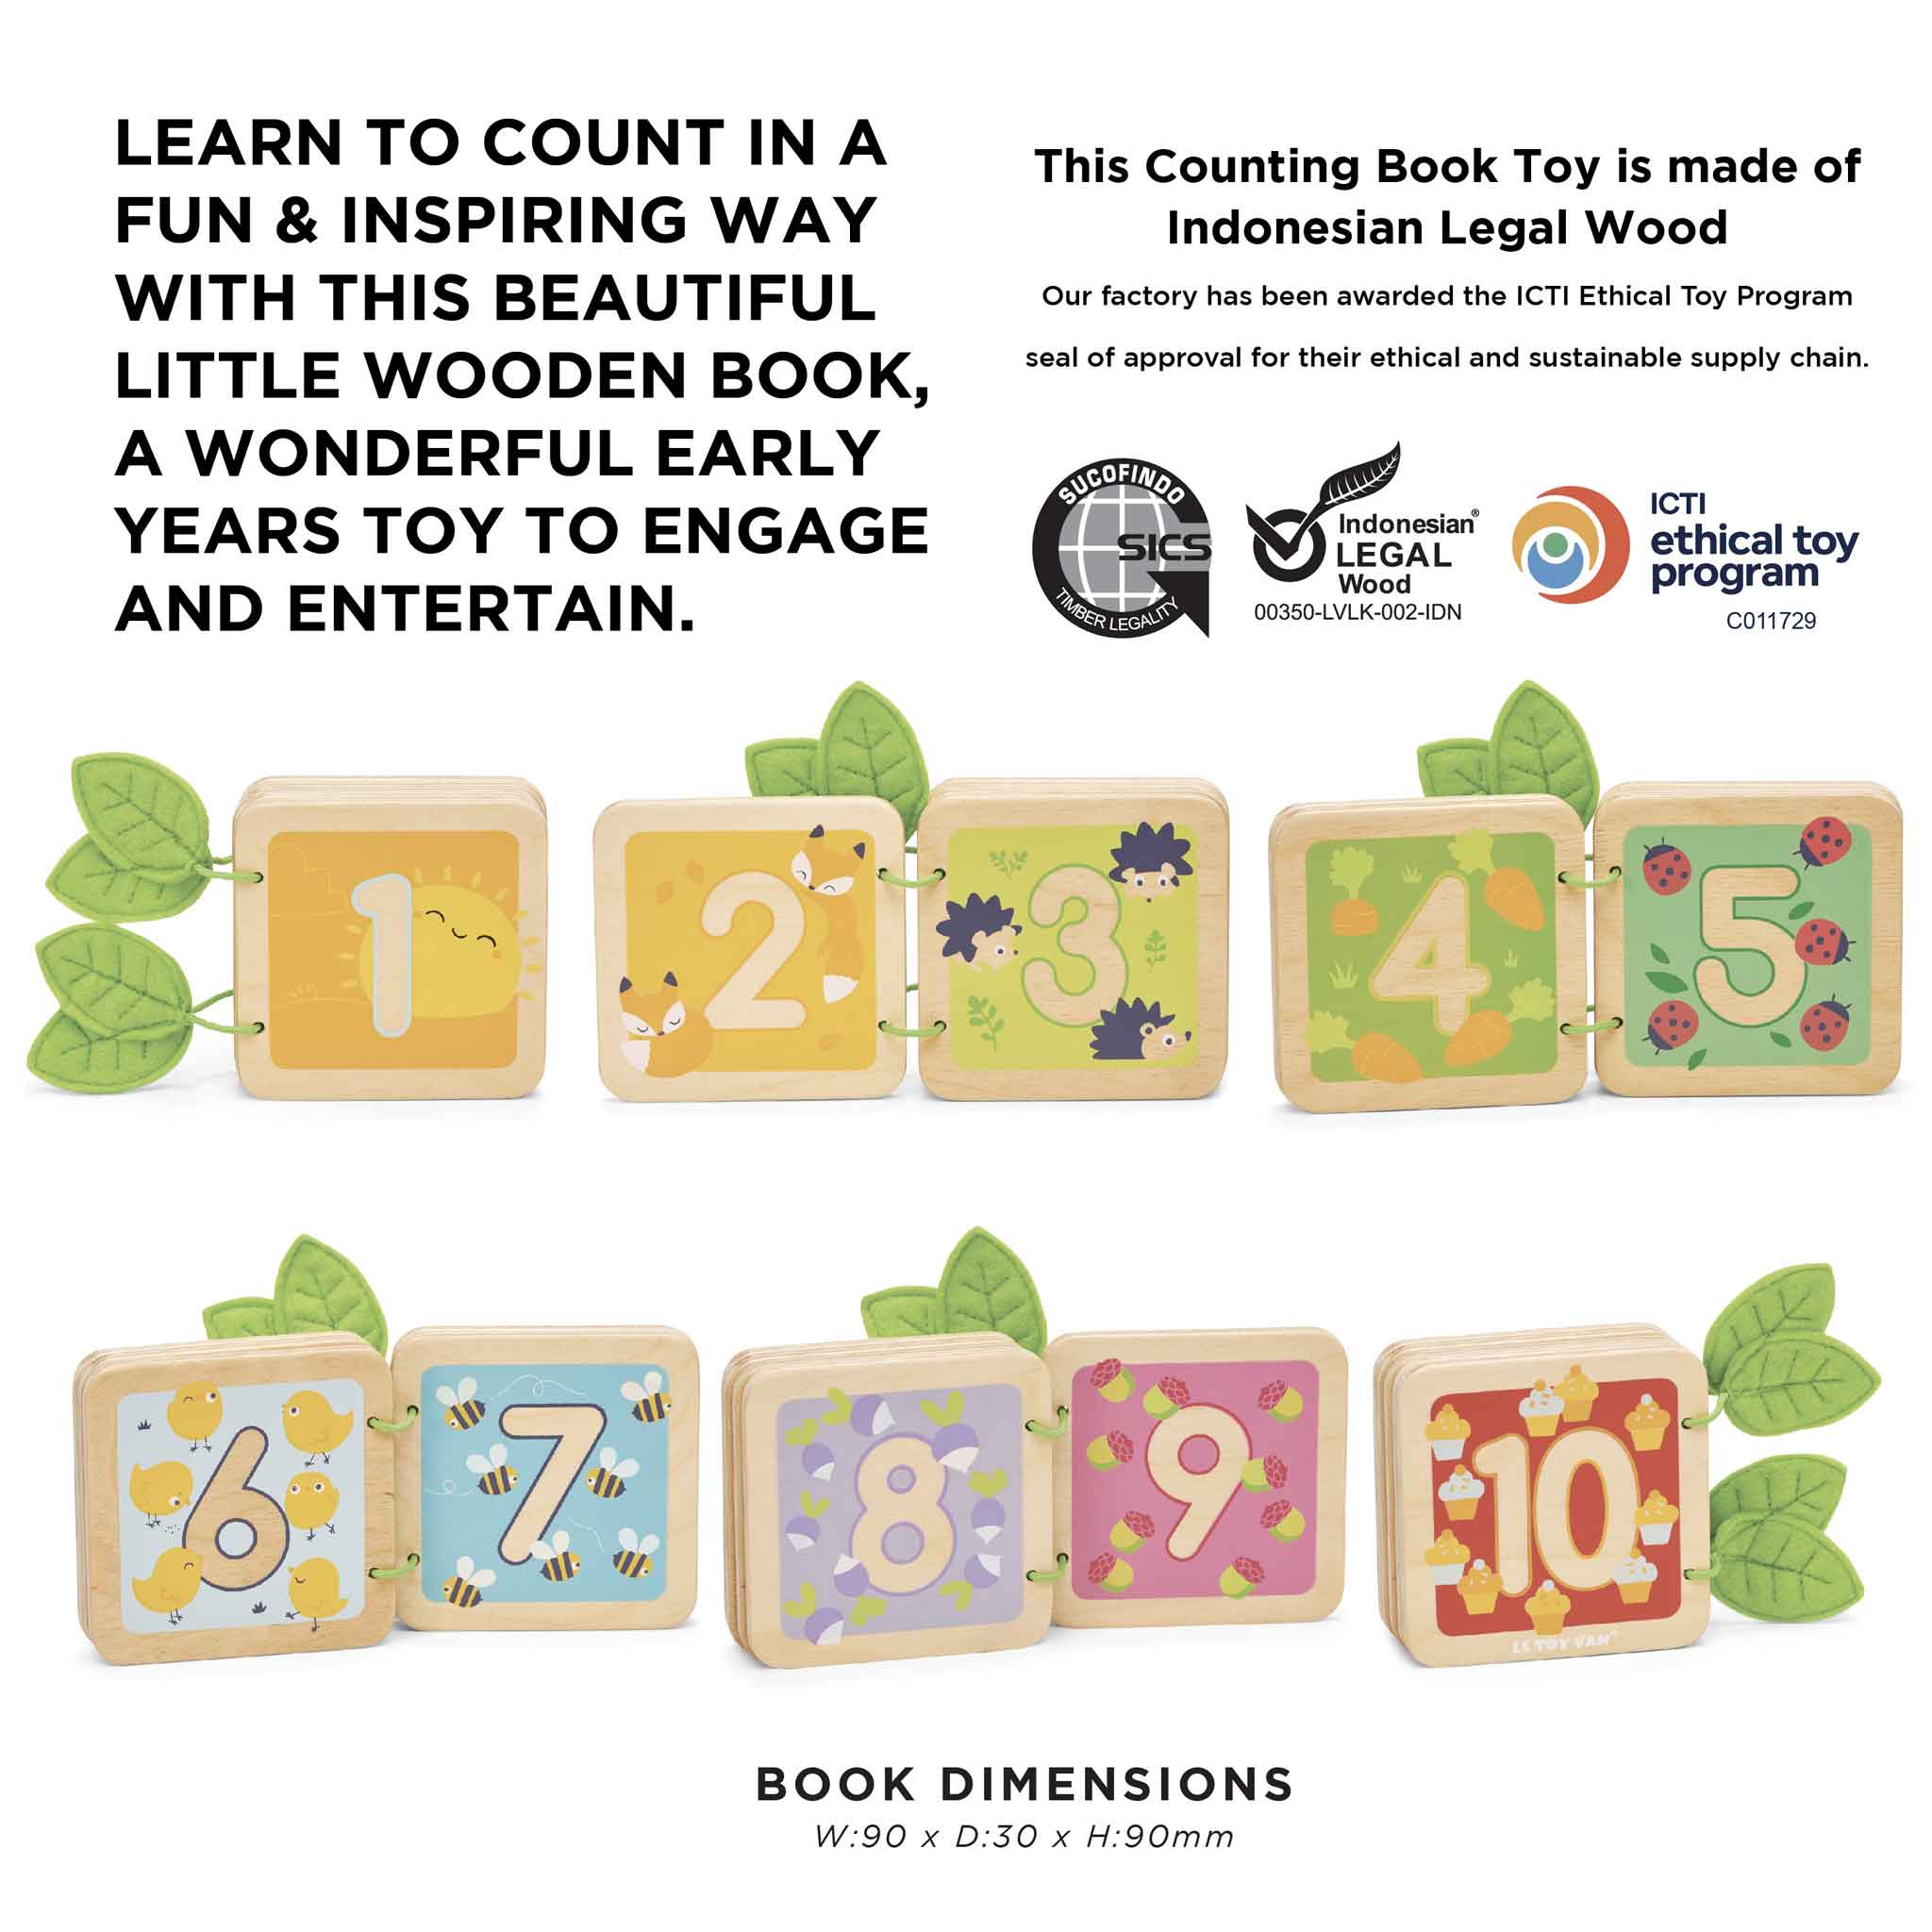 My 1st Counting Book